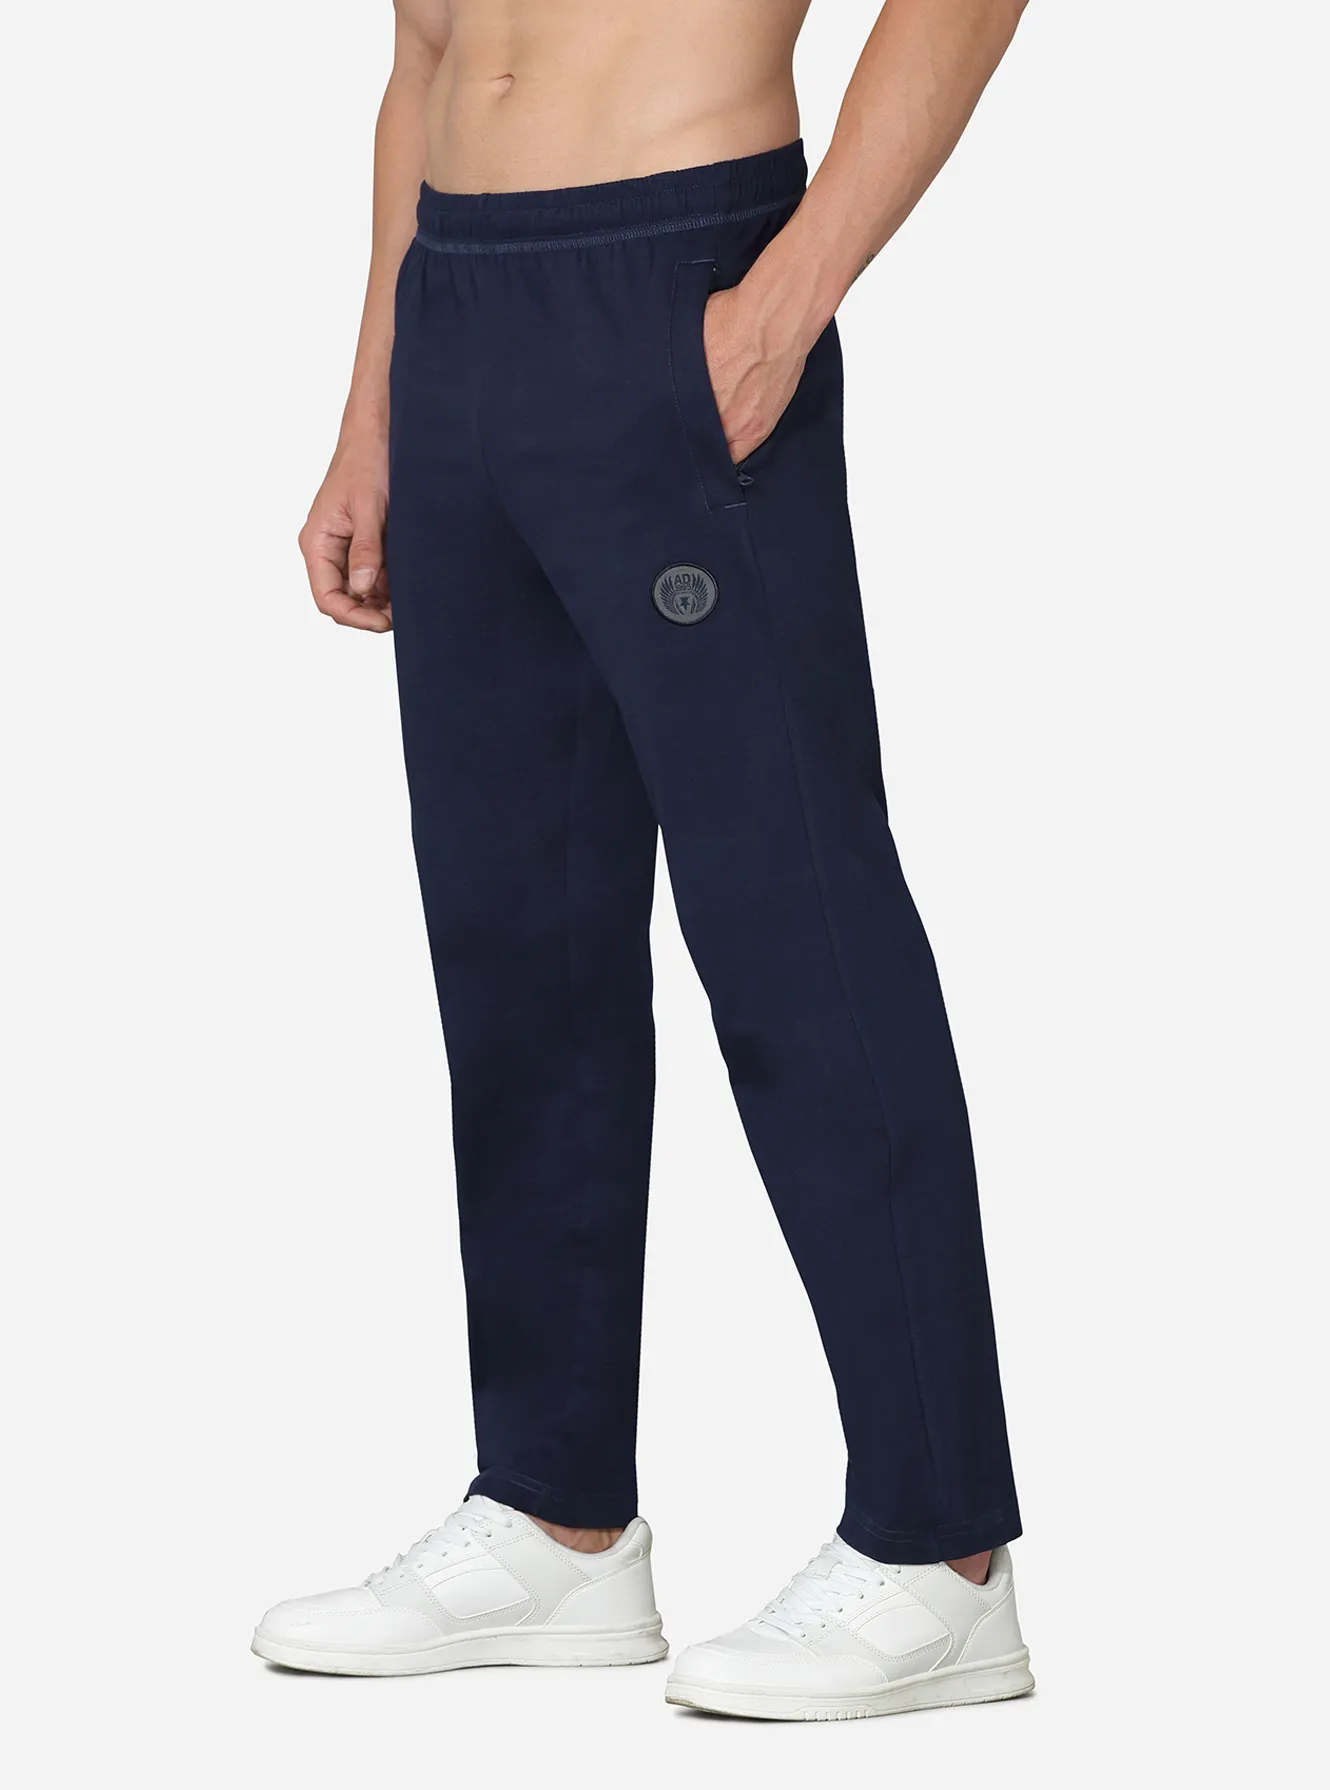 Track Pants With Zipper Pockets Mobile Pouch - Buy Track Pants With Zipper  Pockets Mobile Pouch online in India